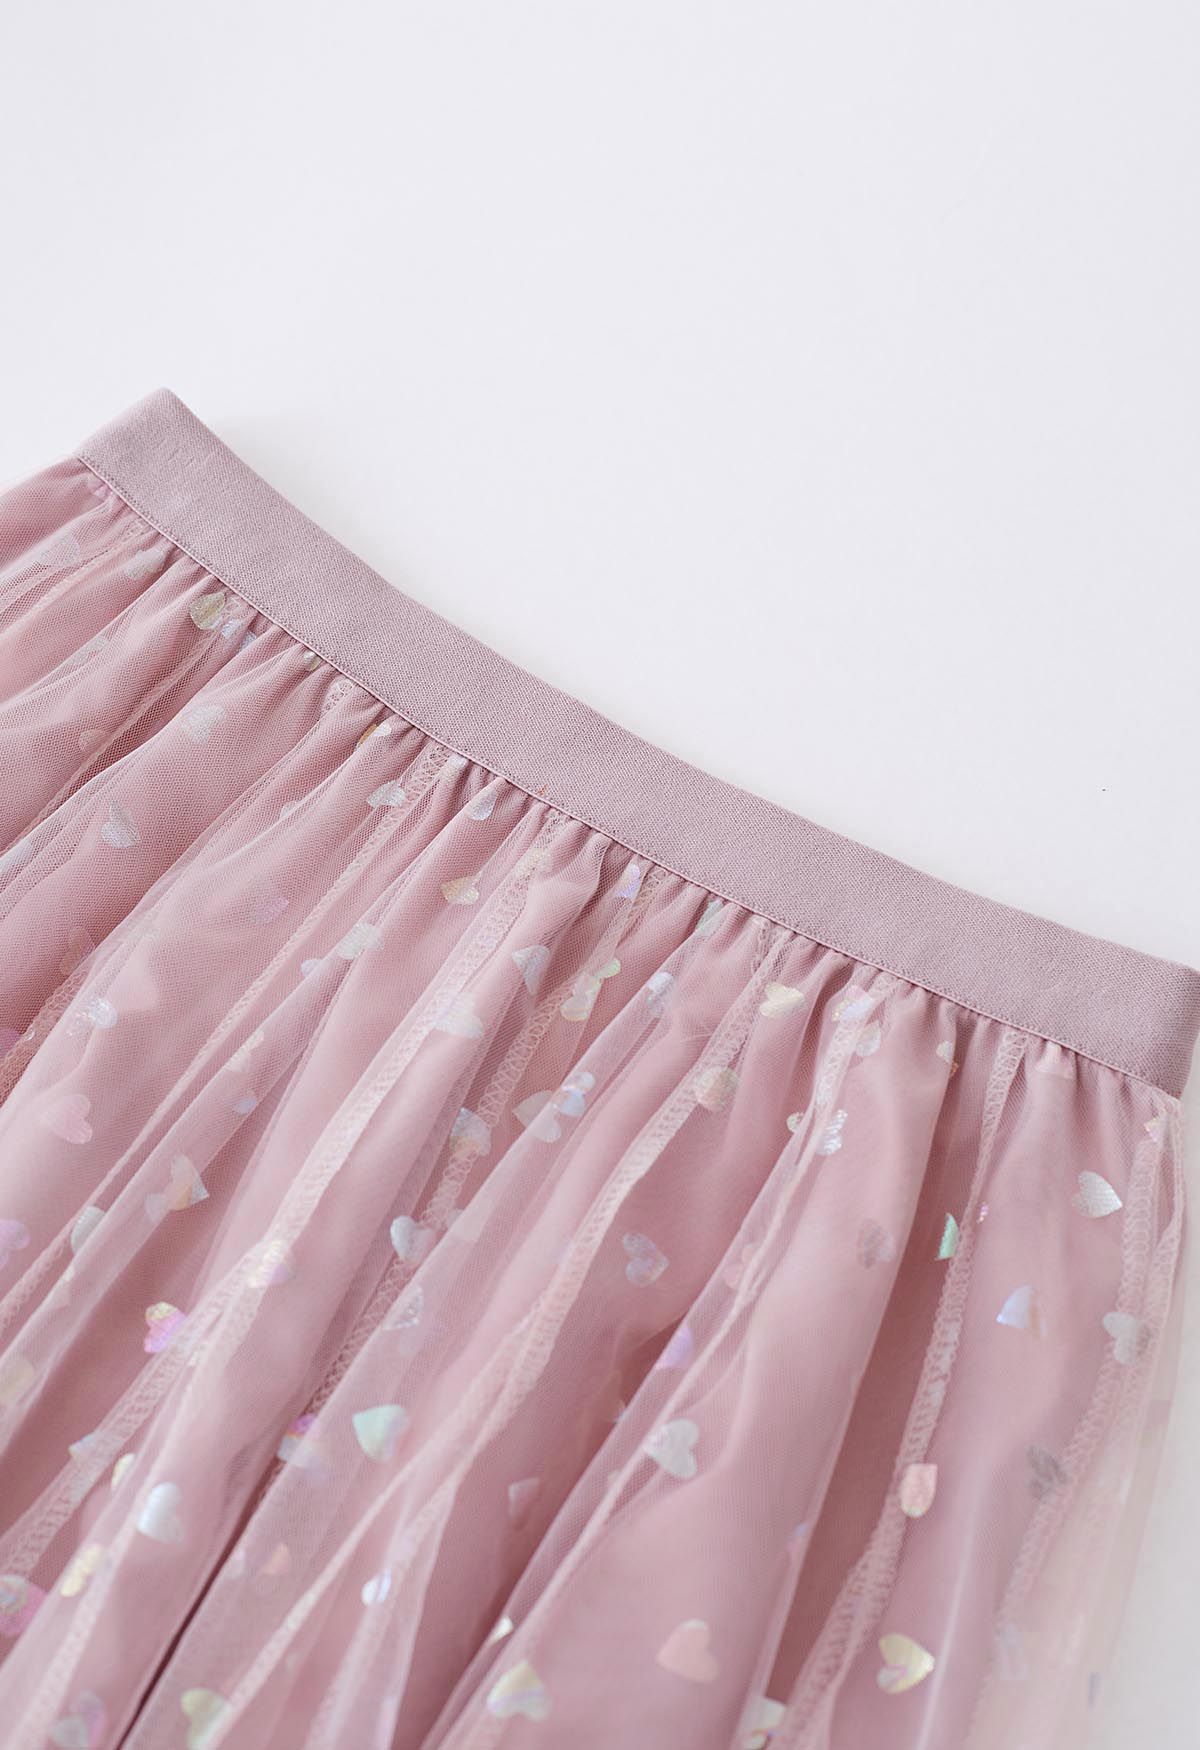 This pretty pink skirt is giving me alllll the feels! 🥰🥰 Skirt & top: @ chicwish Pink skirt, tulle skirt, spring outfits, spring